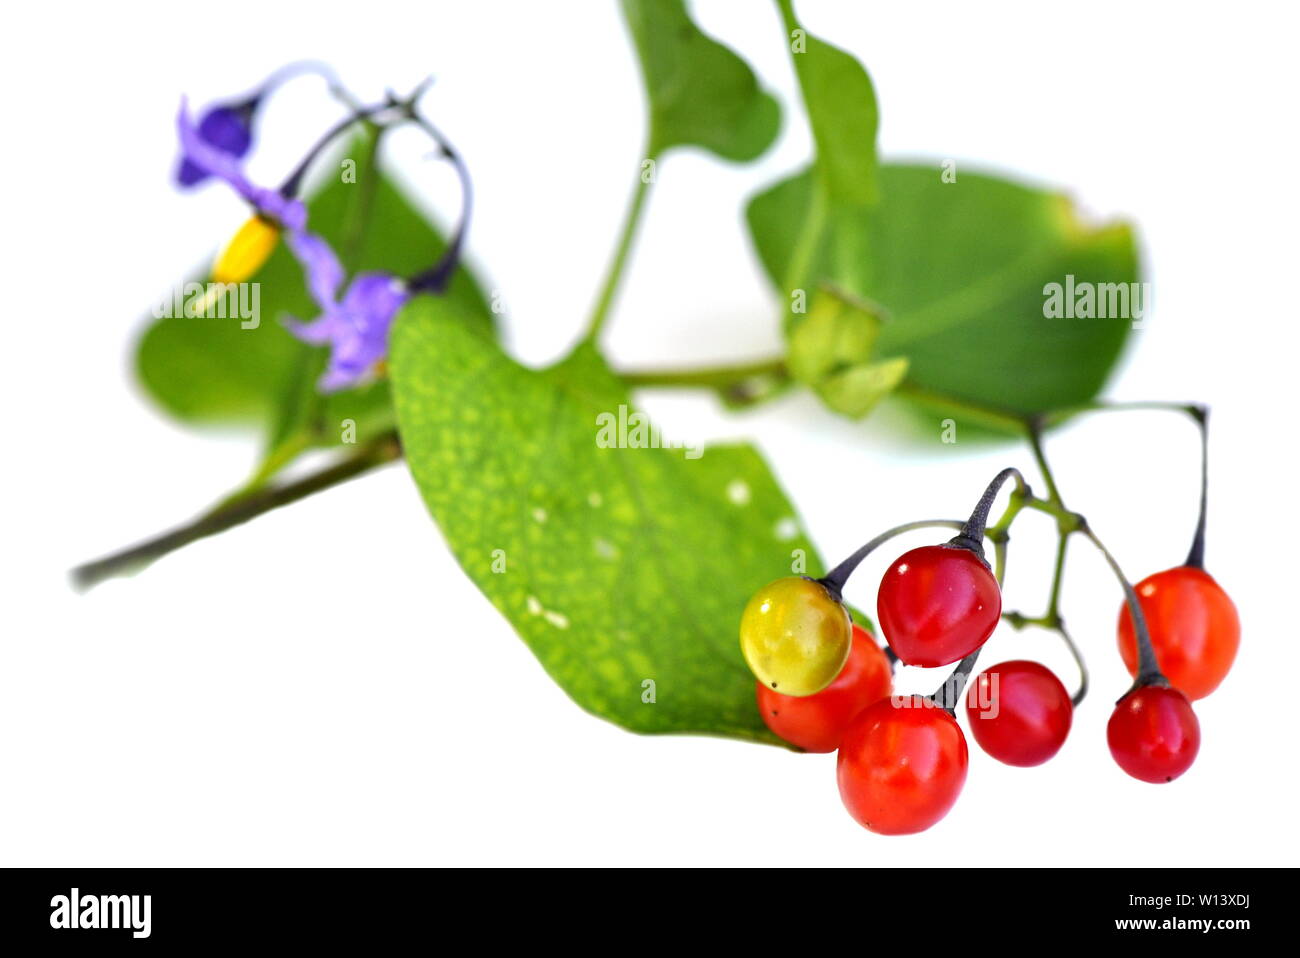 Poisonous berries and purple flowers from bittersweet nightshade Solanum dulcamara isolated on white background Stock Photo